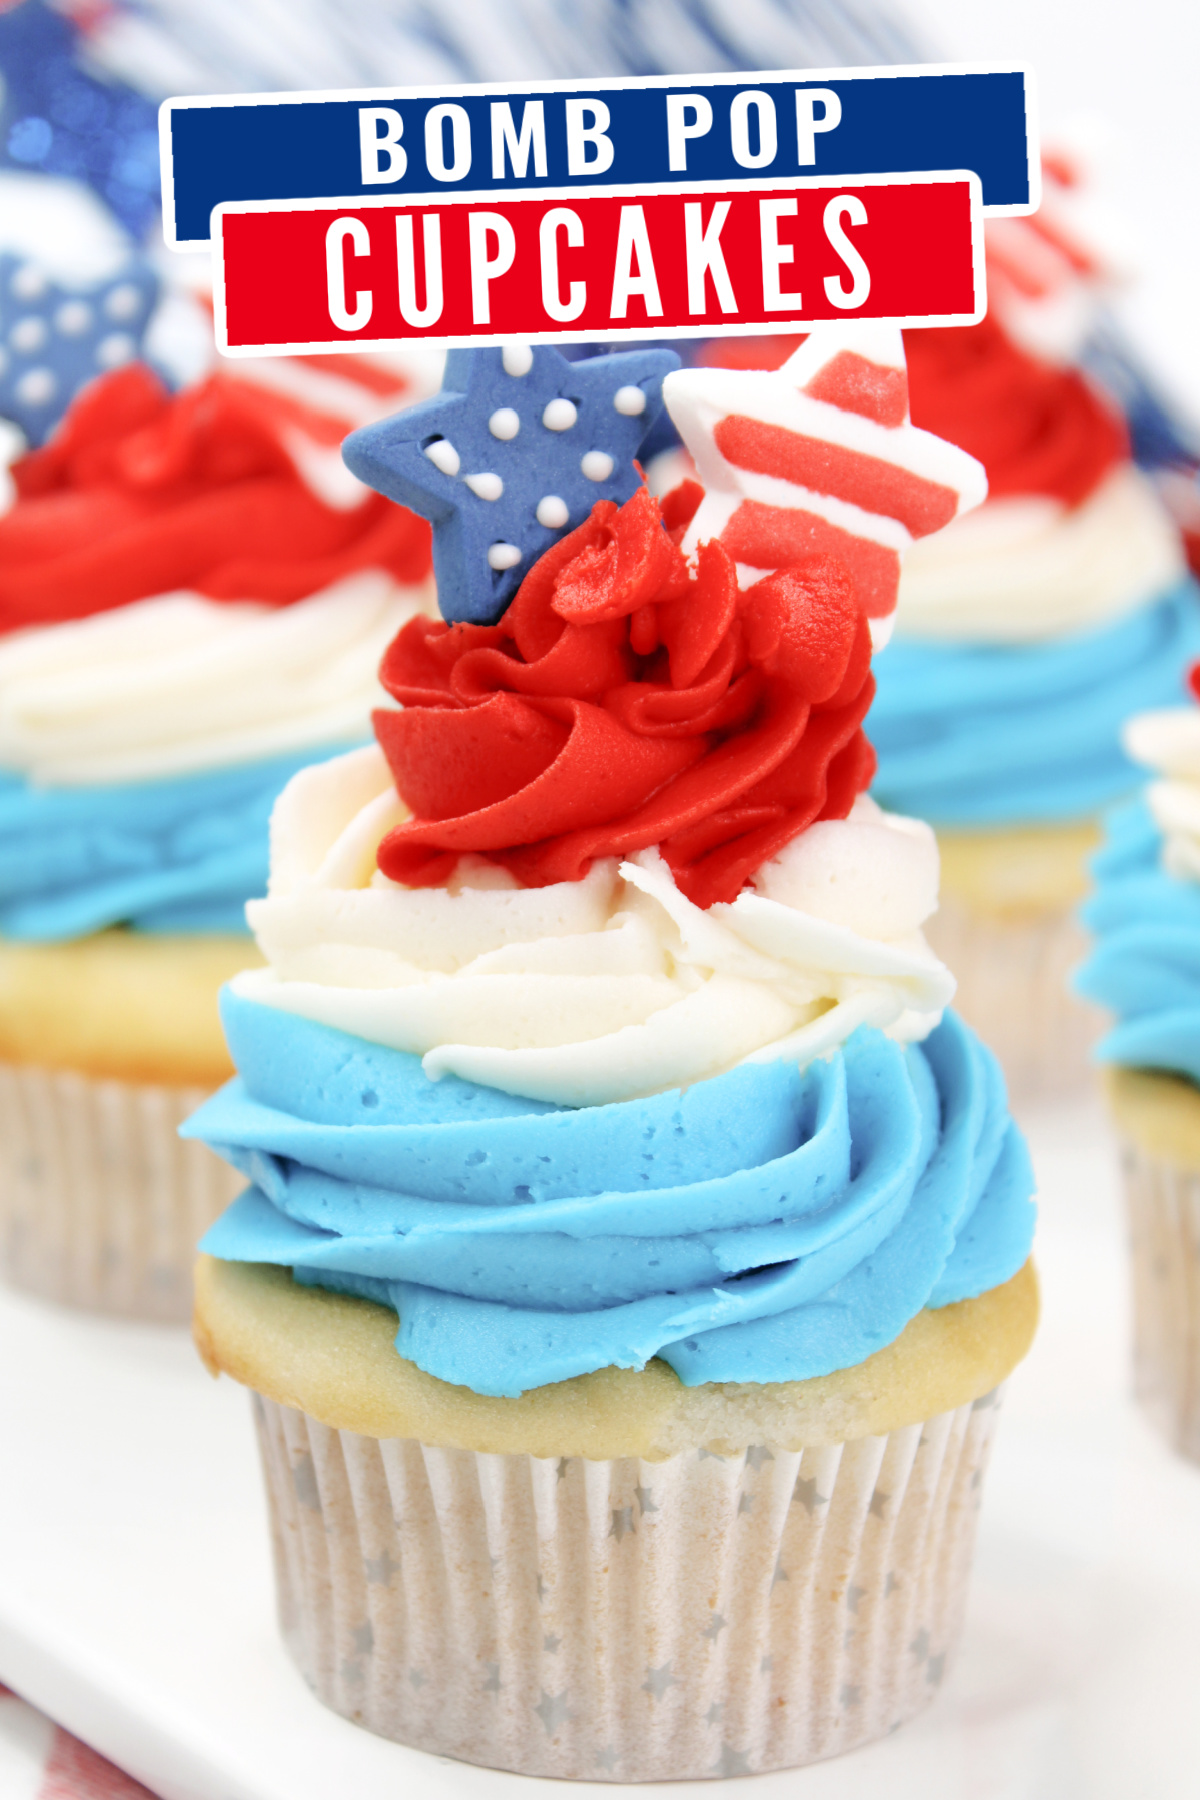 These bomb pop cupcakes are a patriotic treat perfect for celebrating with; based on the iconic summer treat that never goes out of style.